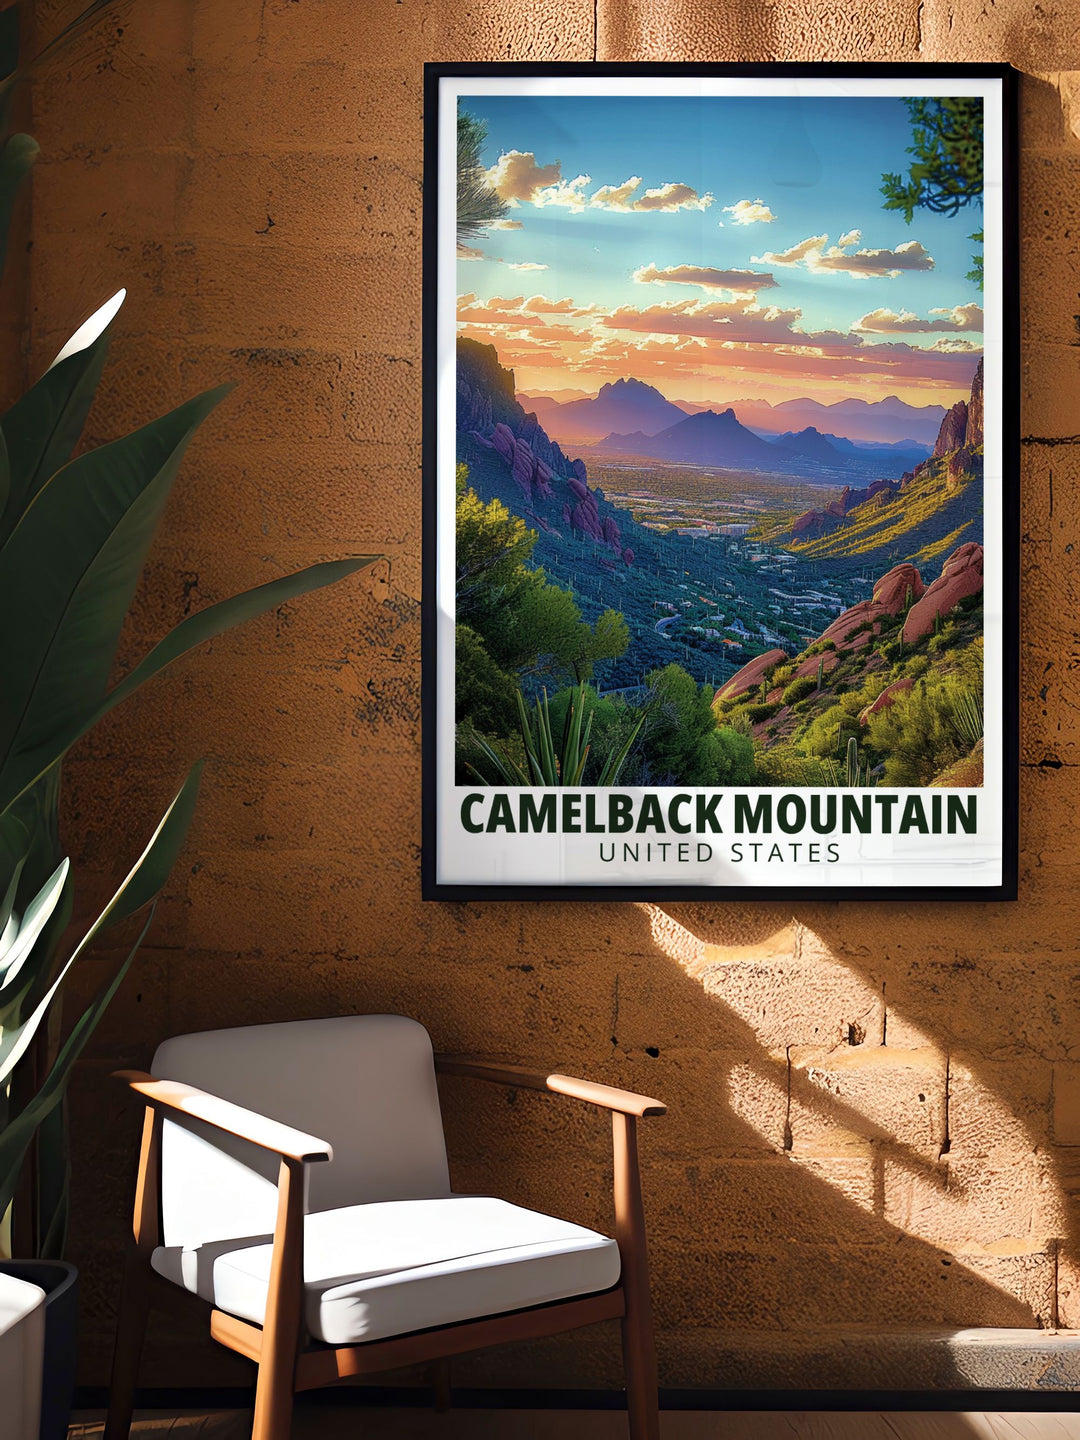 Celebrate the beauty of Arizona with this Echo Canyon Trail poster. Featuring Mt. Camelback this Arizona artwork is perfect for wall decor adding a touch of the states natural wonders to your living space. Ideal for travel enthusiasts and art lovers alike.